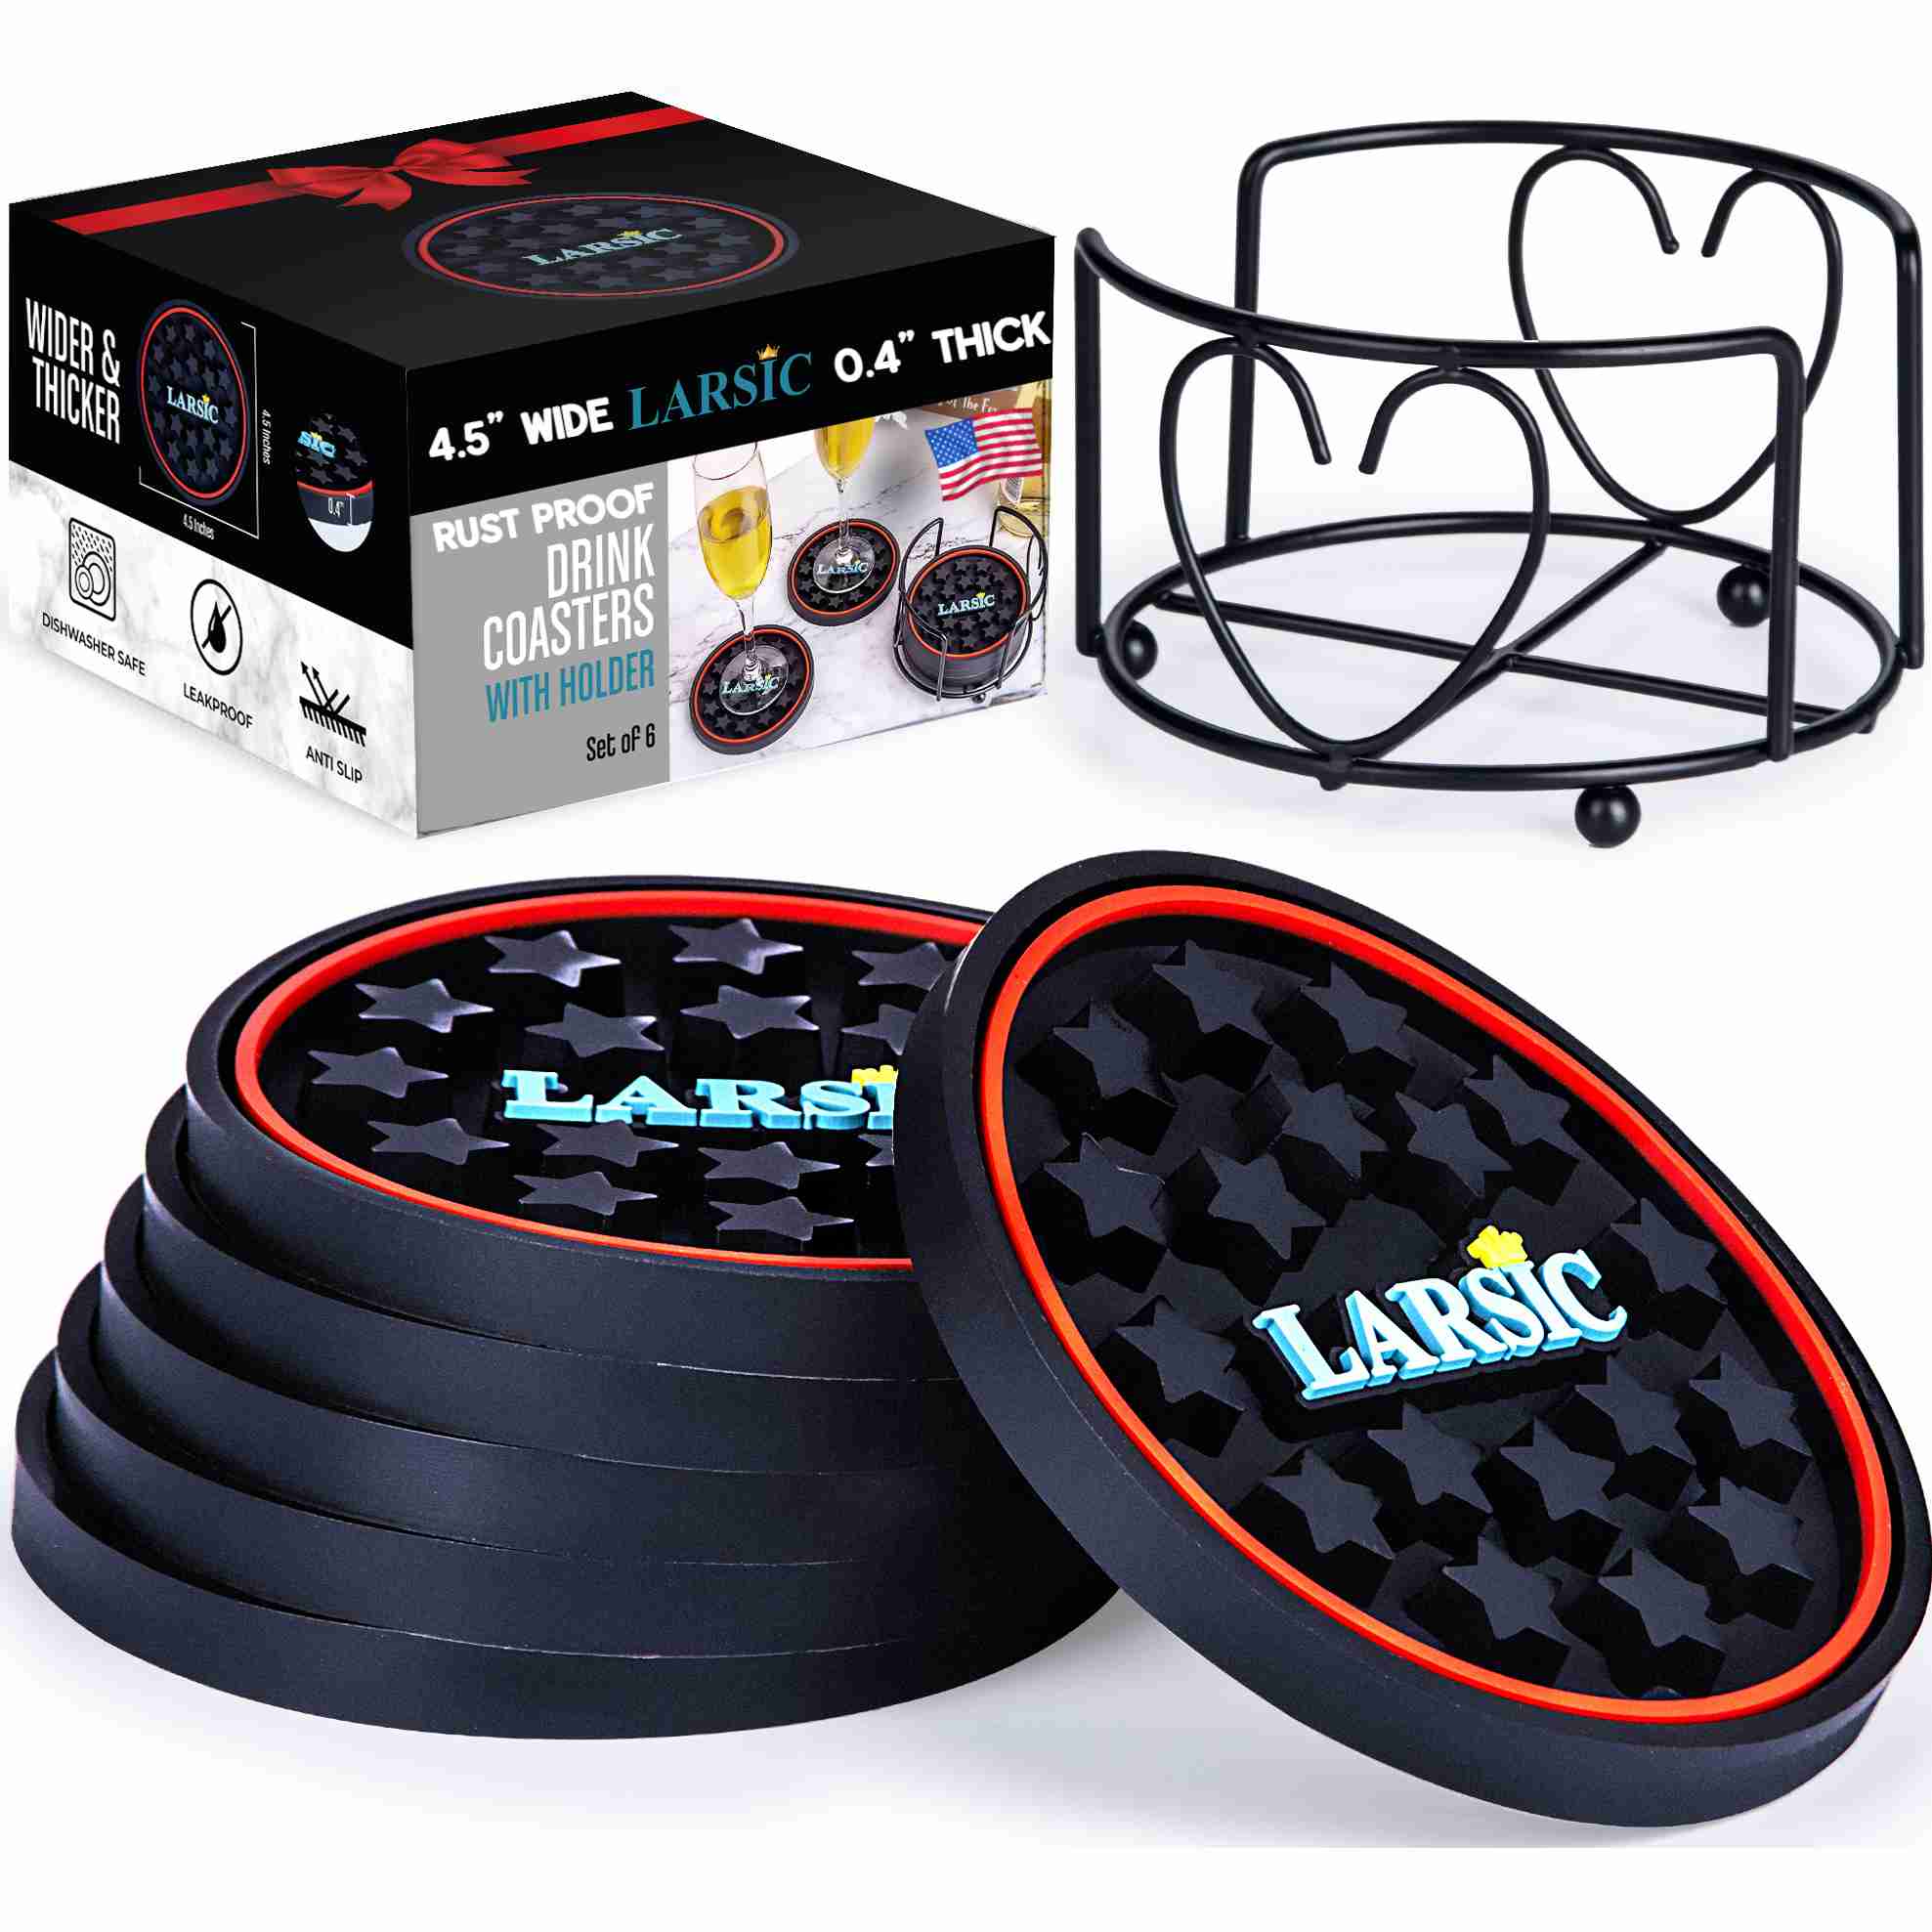 coasters-with-holder with cash back rebate